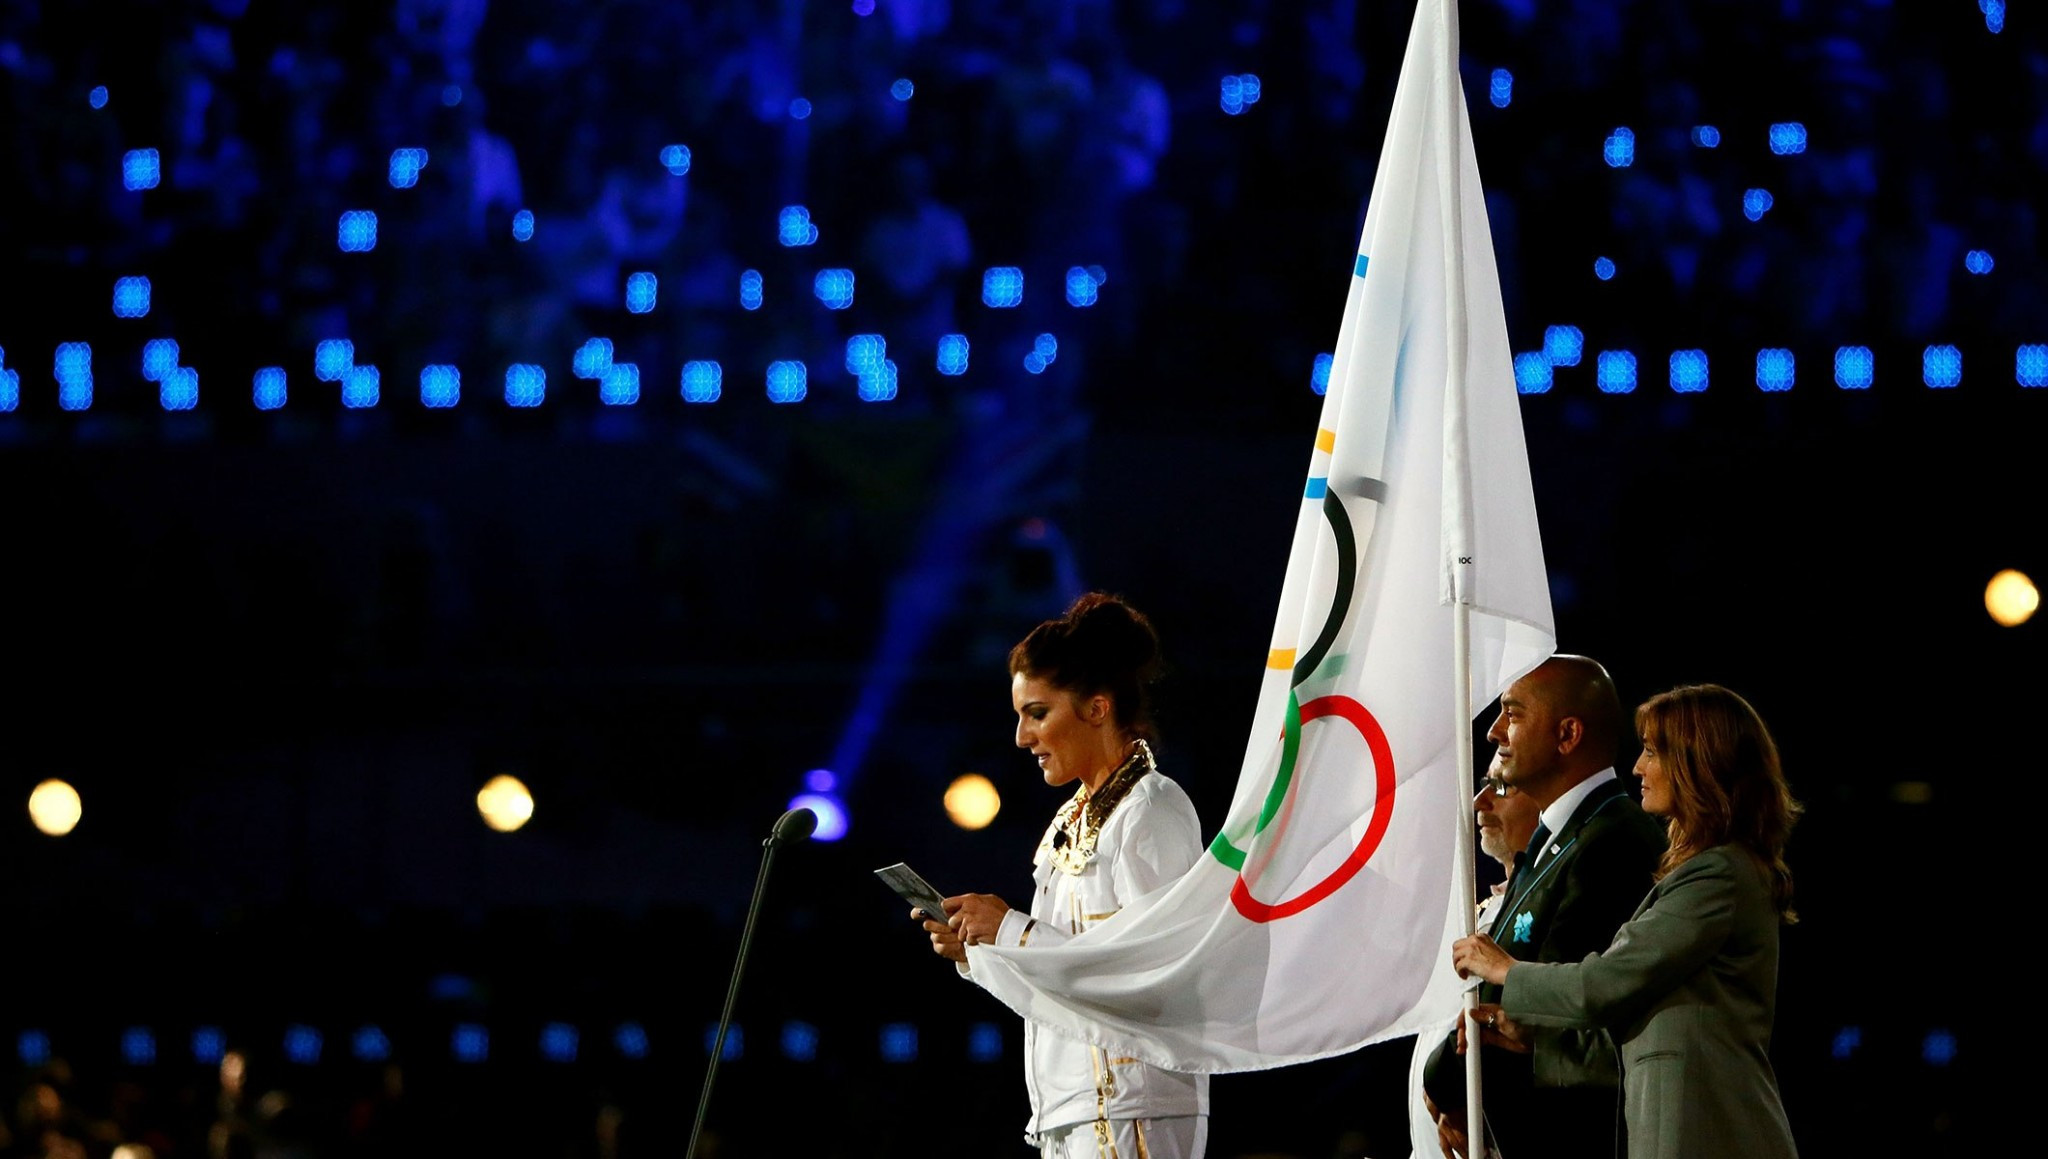 Changes have been made to the Athletes' Oath at an Olympic Opening Ceremony ©IOC